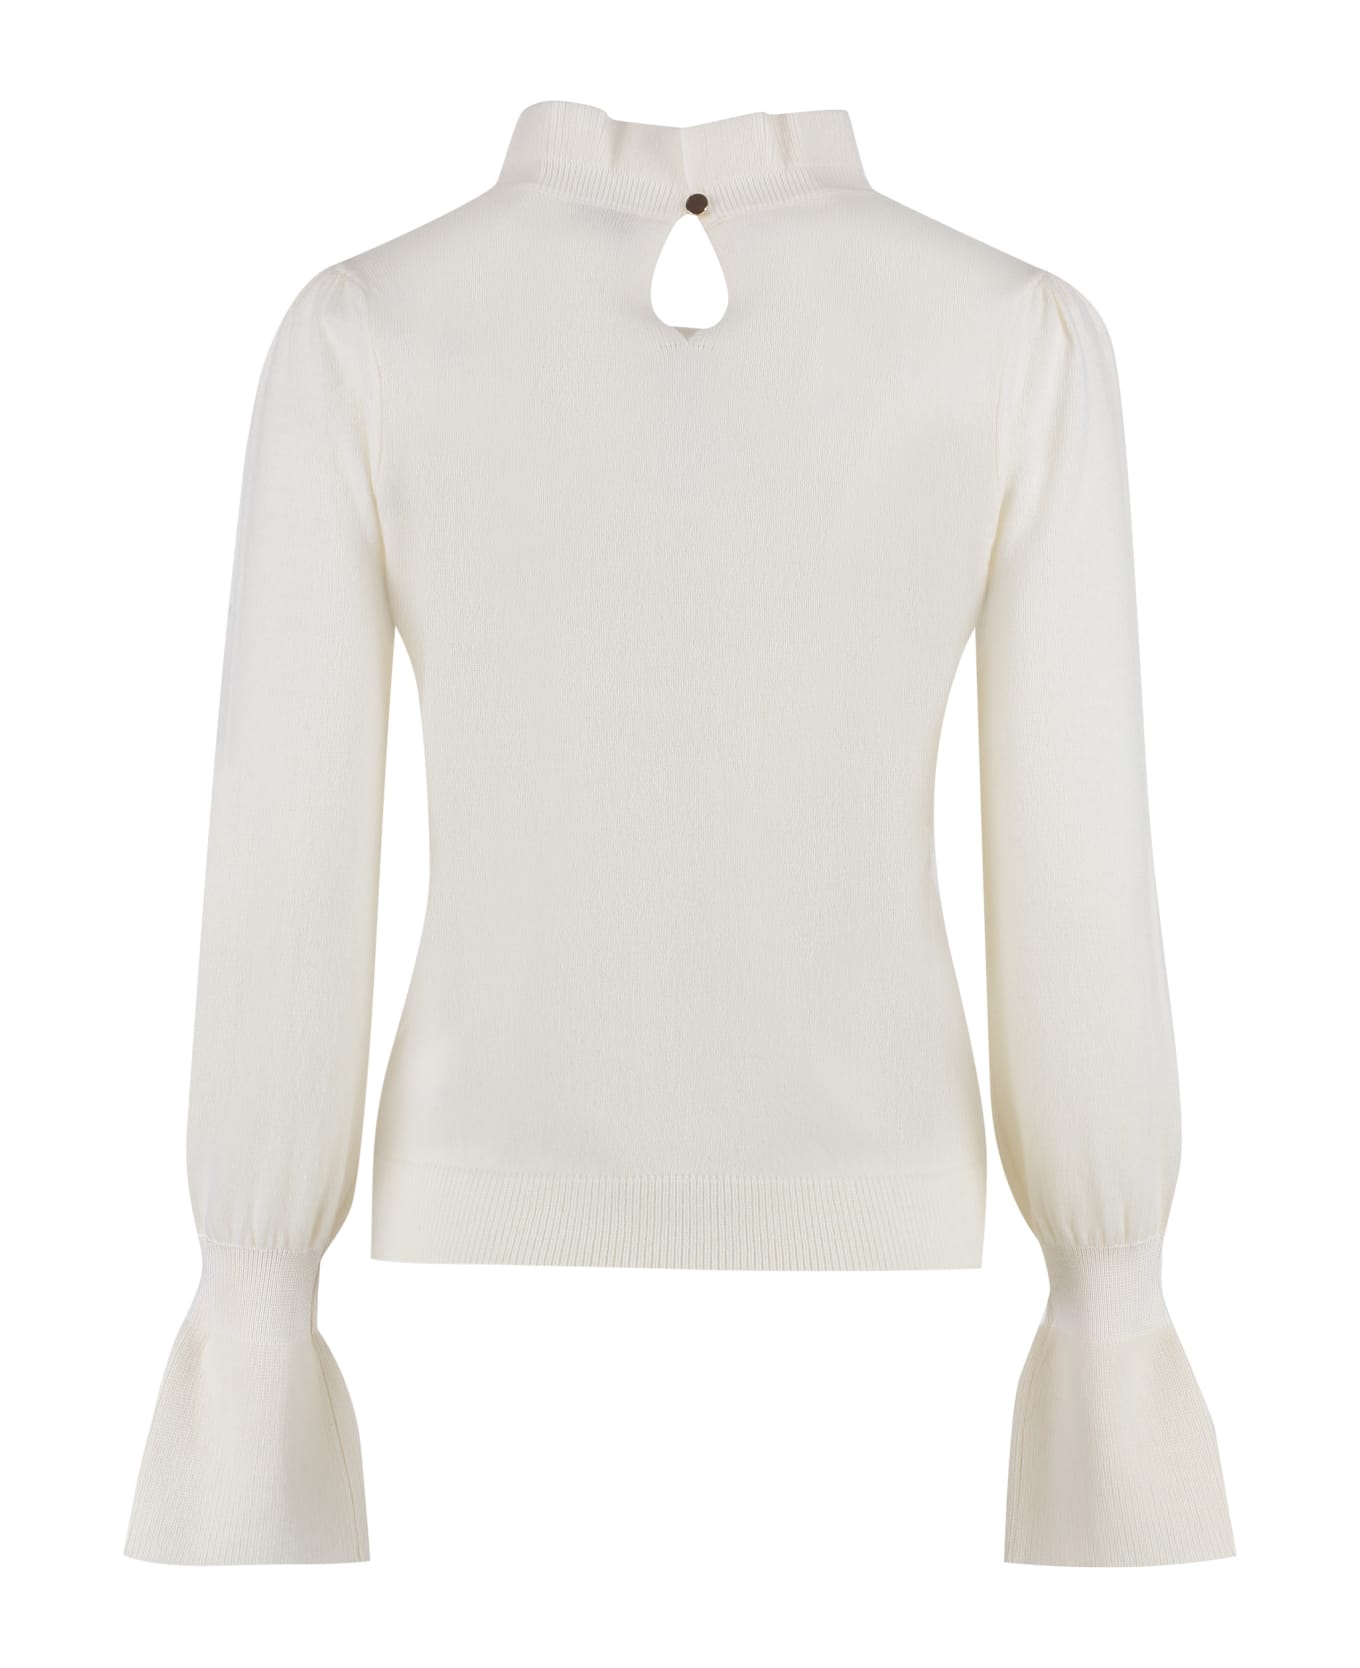 Hugo Boss Ribbed Cashmere And Wool Sweater - Ivory